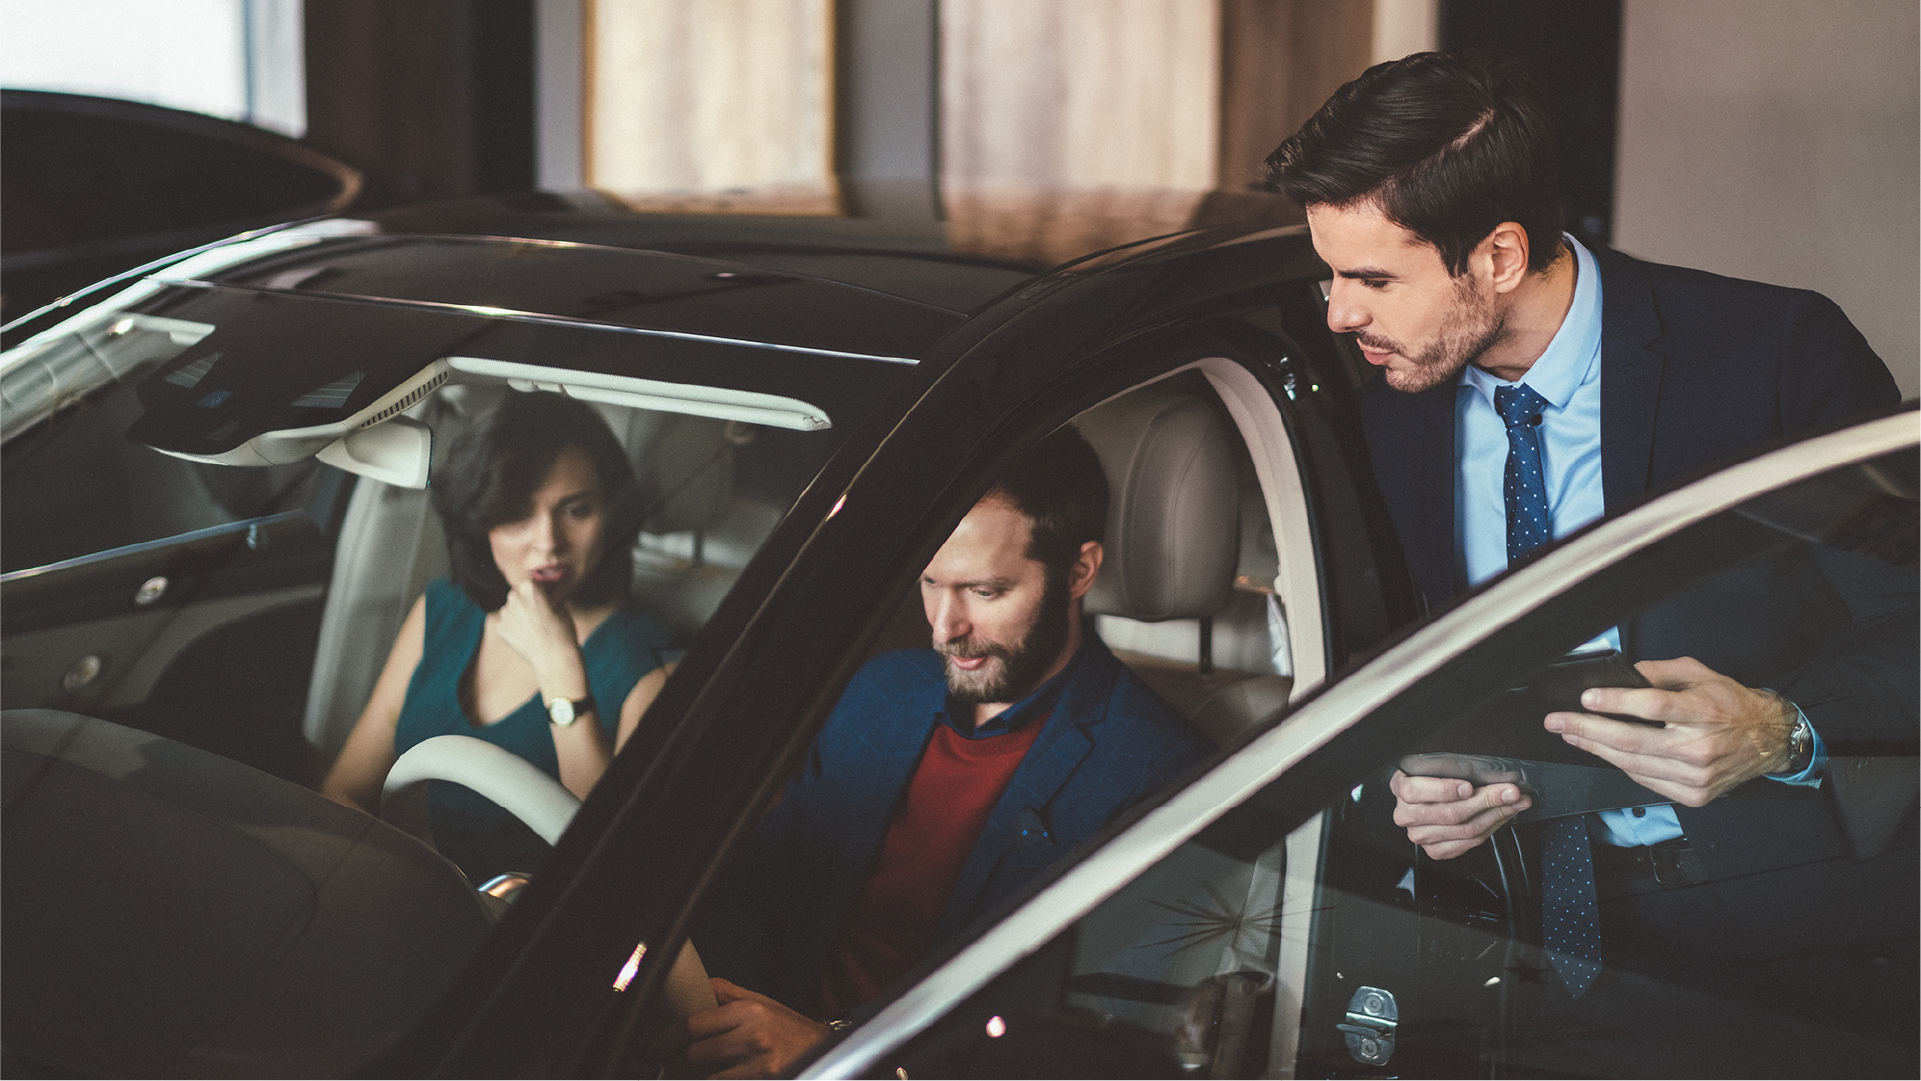 Decorative image: A car salesperson talking to two customers sitting in the front of a car they are considering buying.